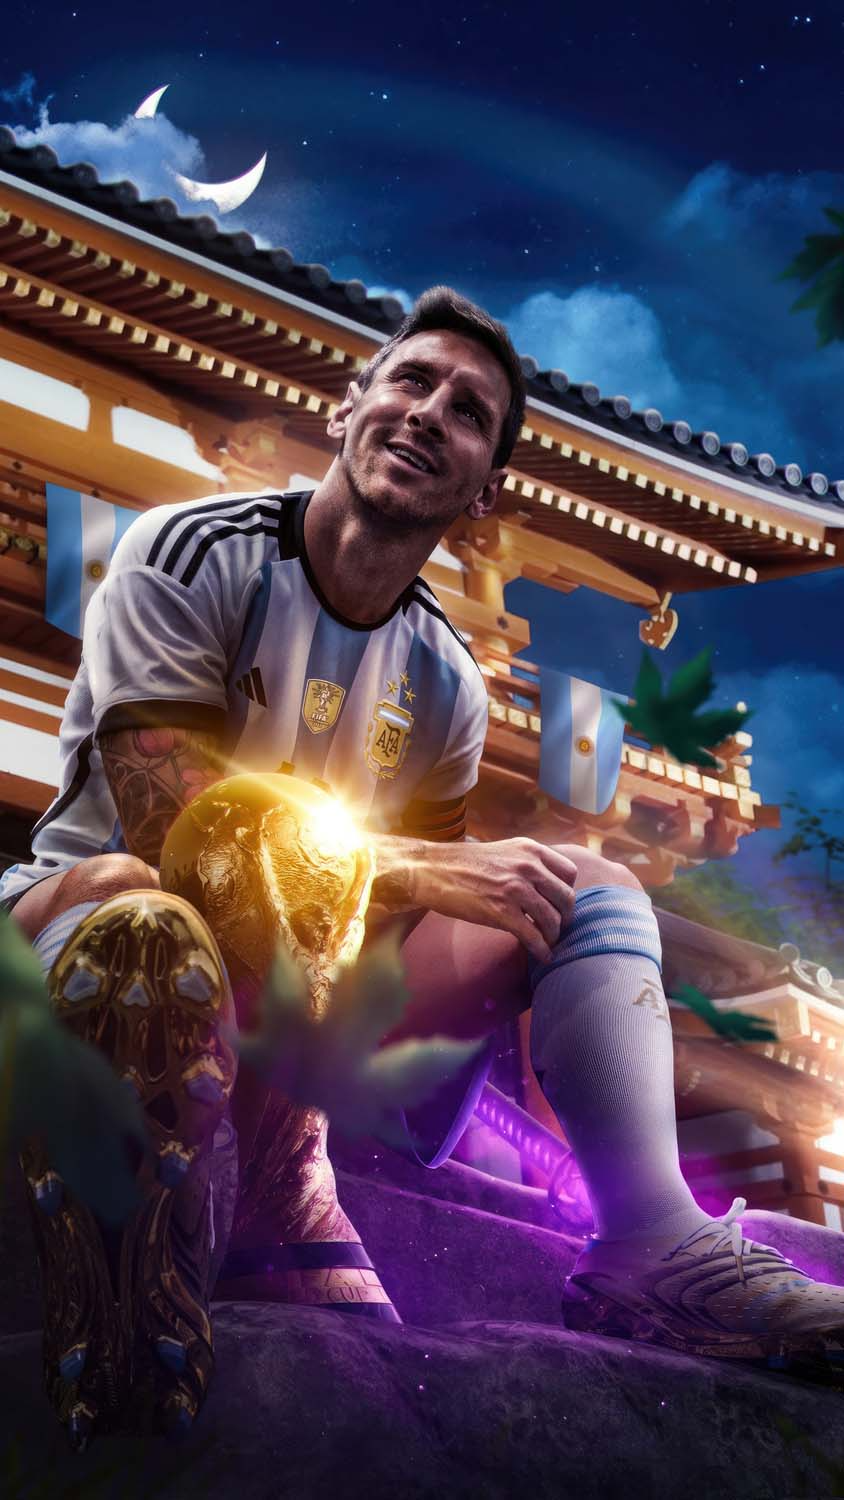 Tải xuống APK Lionel Messi Wallpaper HD cho Android